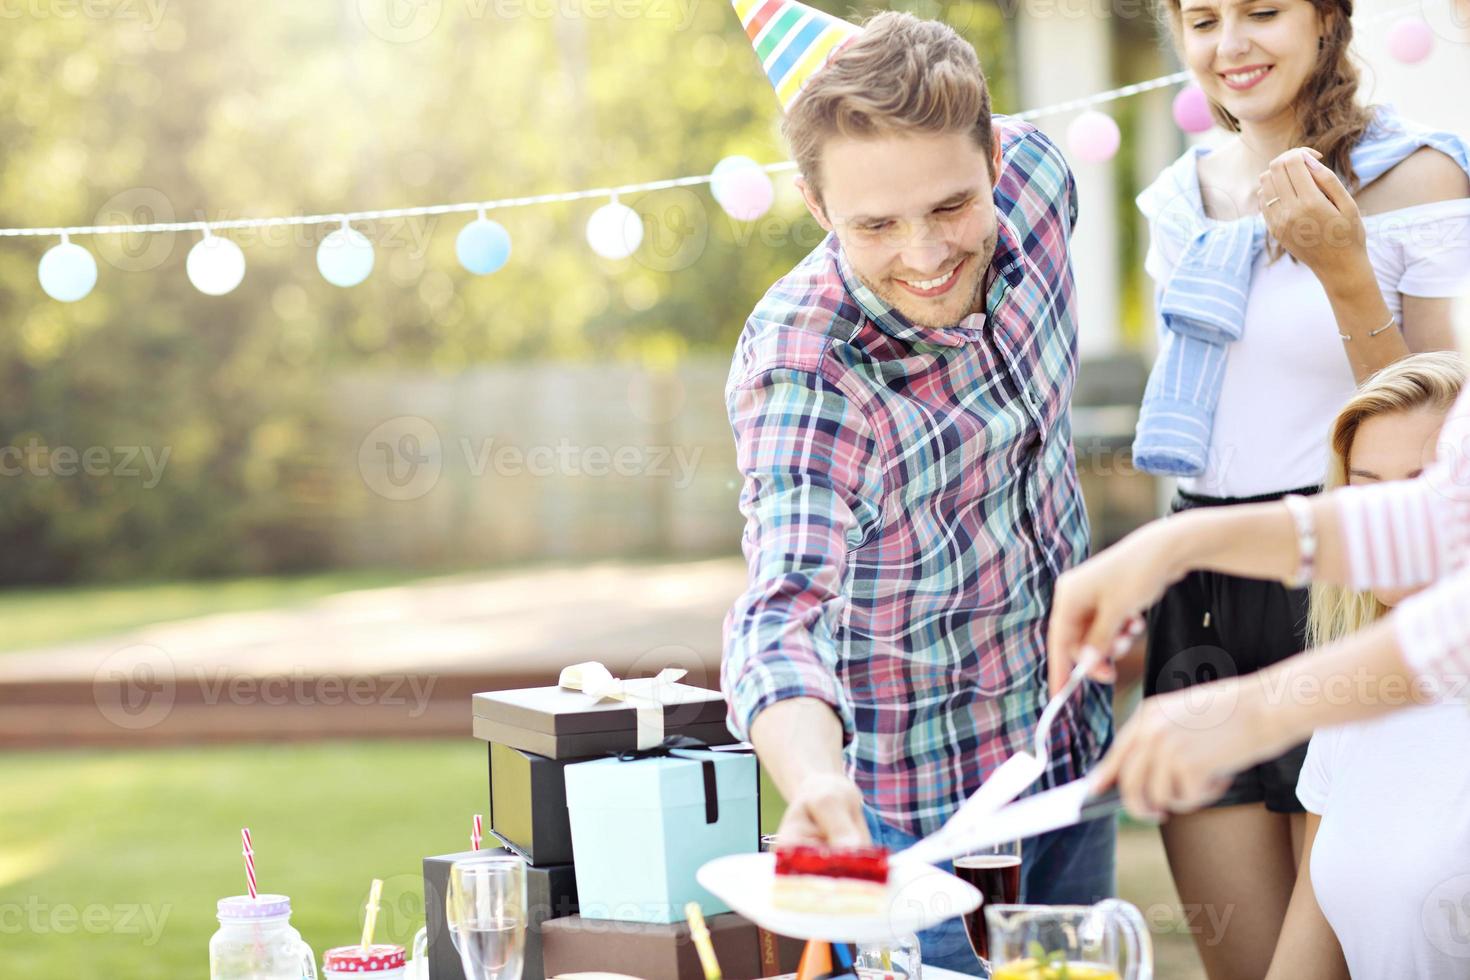 Group of friends having fun at birthday party photo